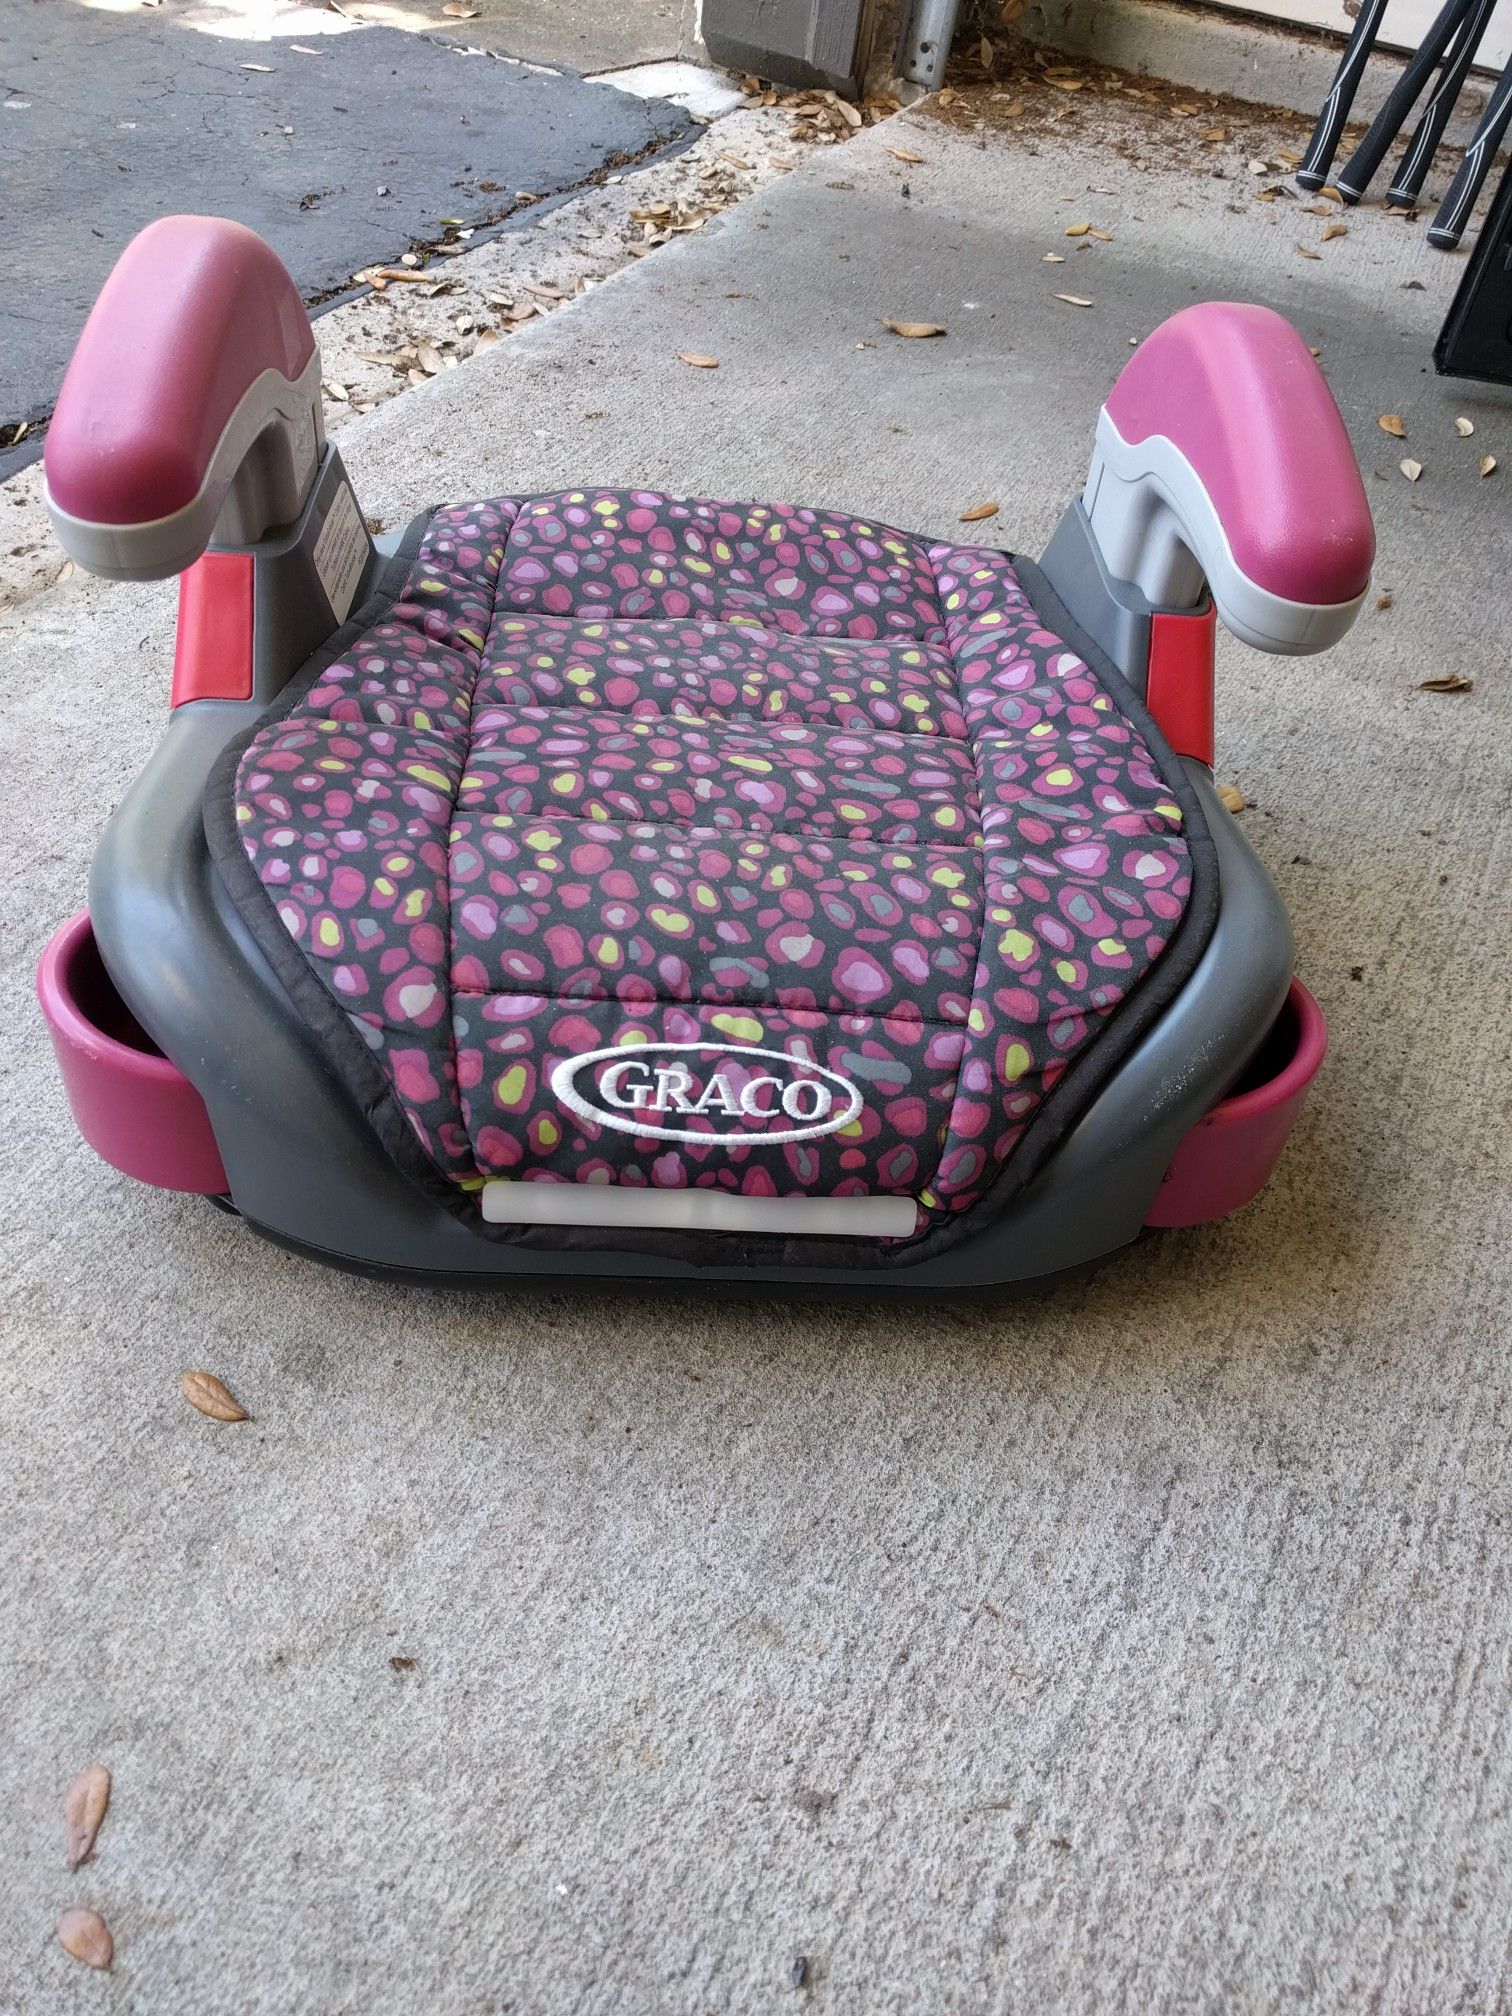 Graco seat booster